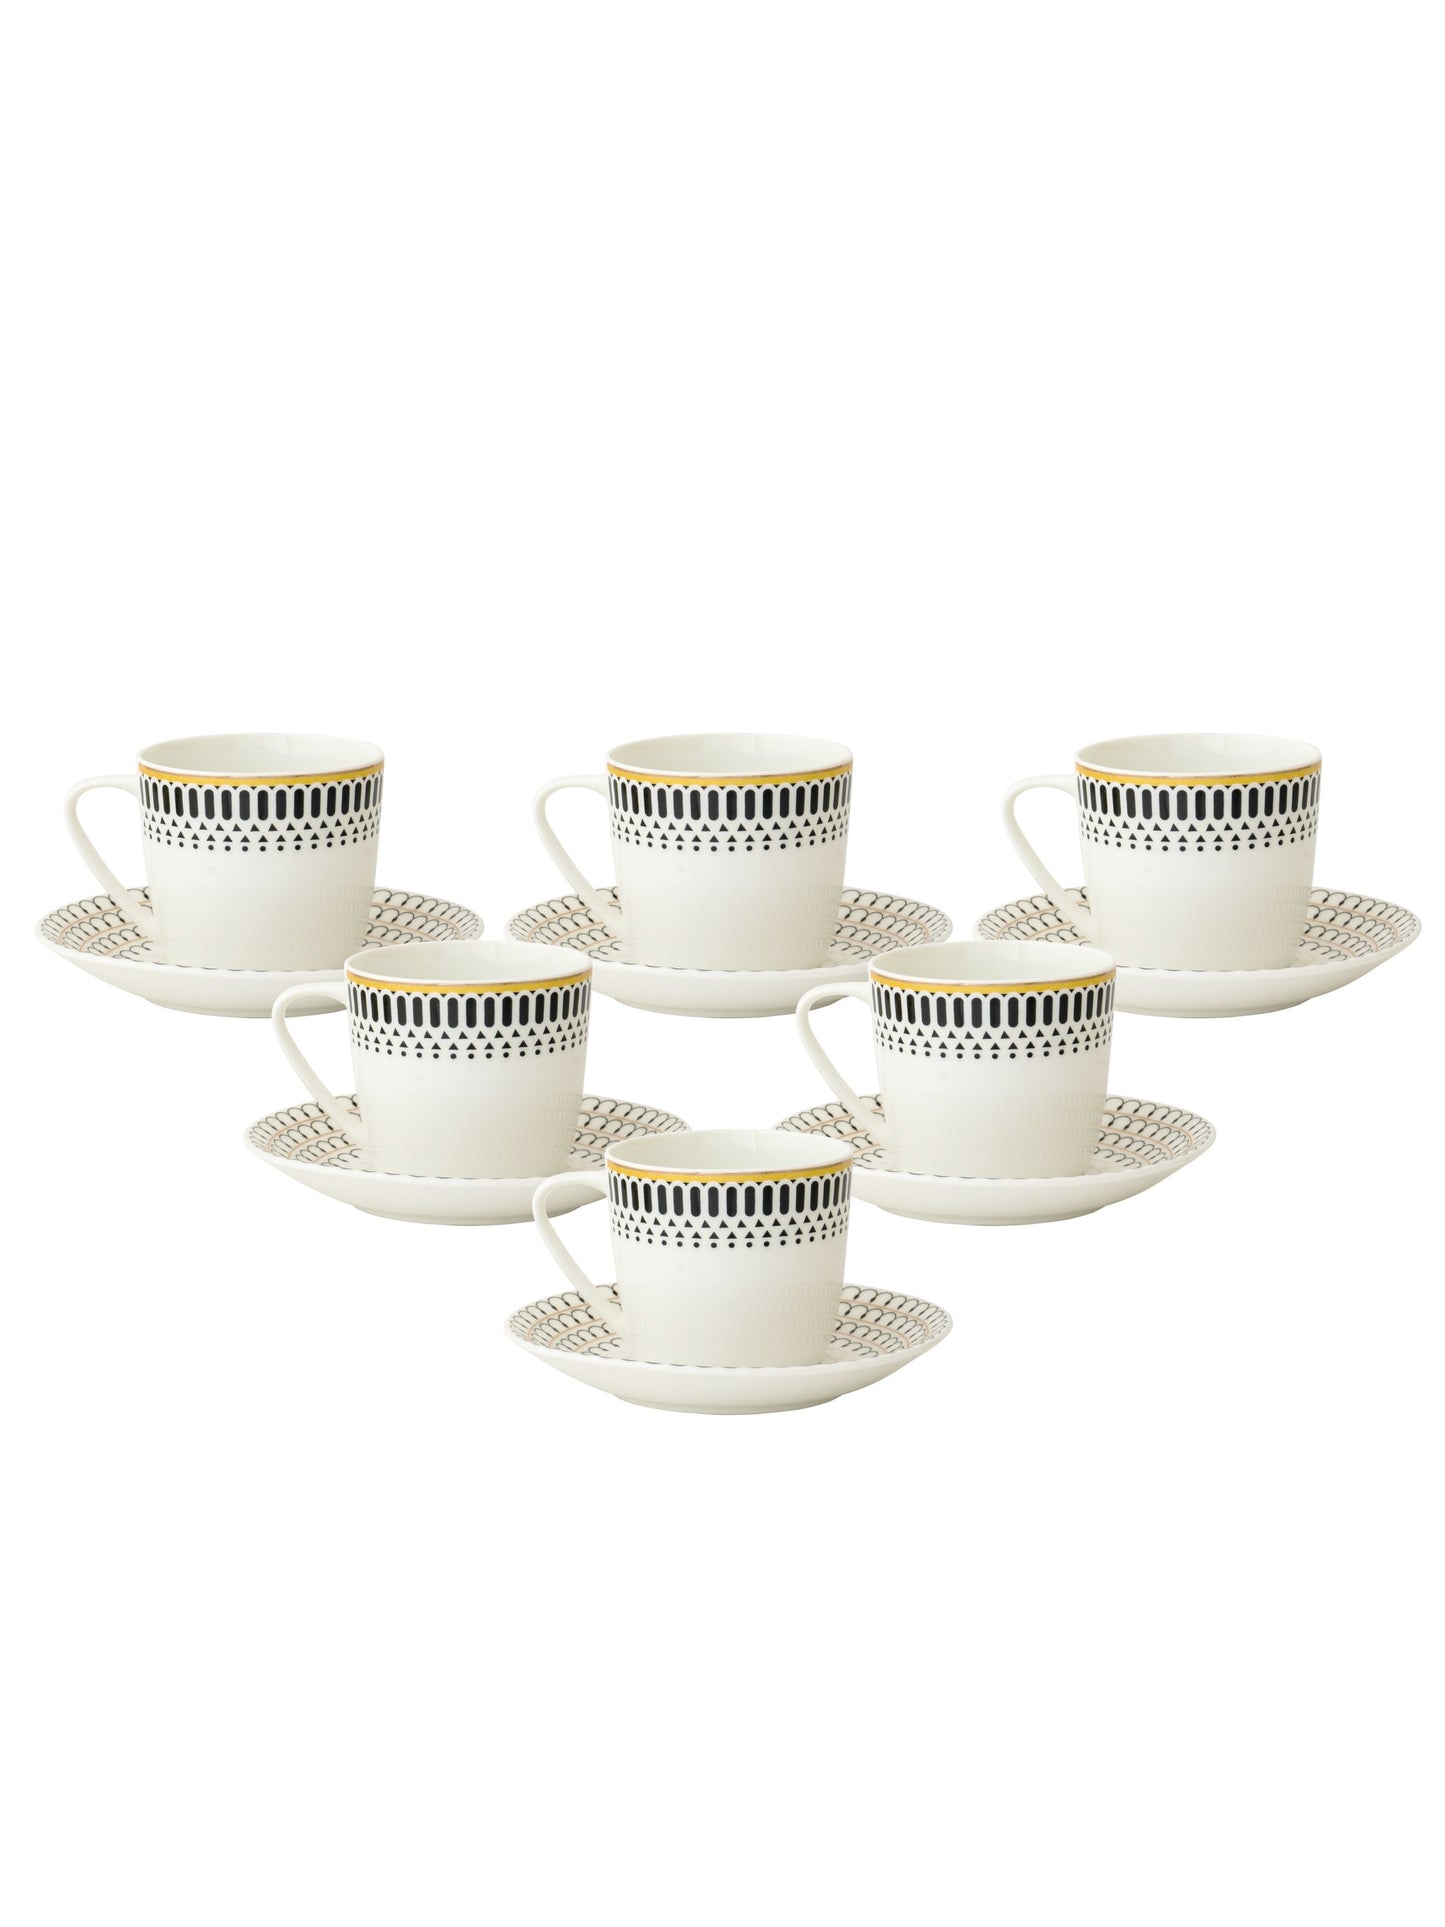 Cheers Super Cup & Saucer, 170 ml, Set of 12 (6 Cups + 6 Saucers) (S381)